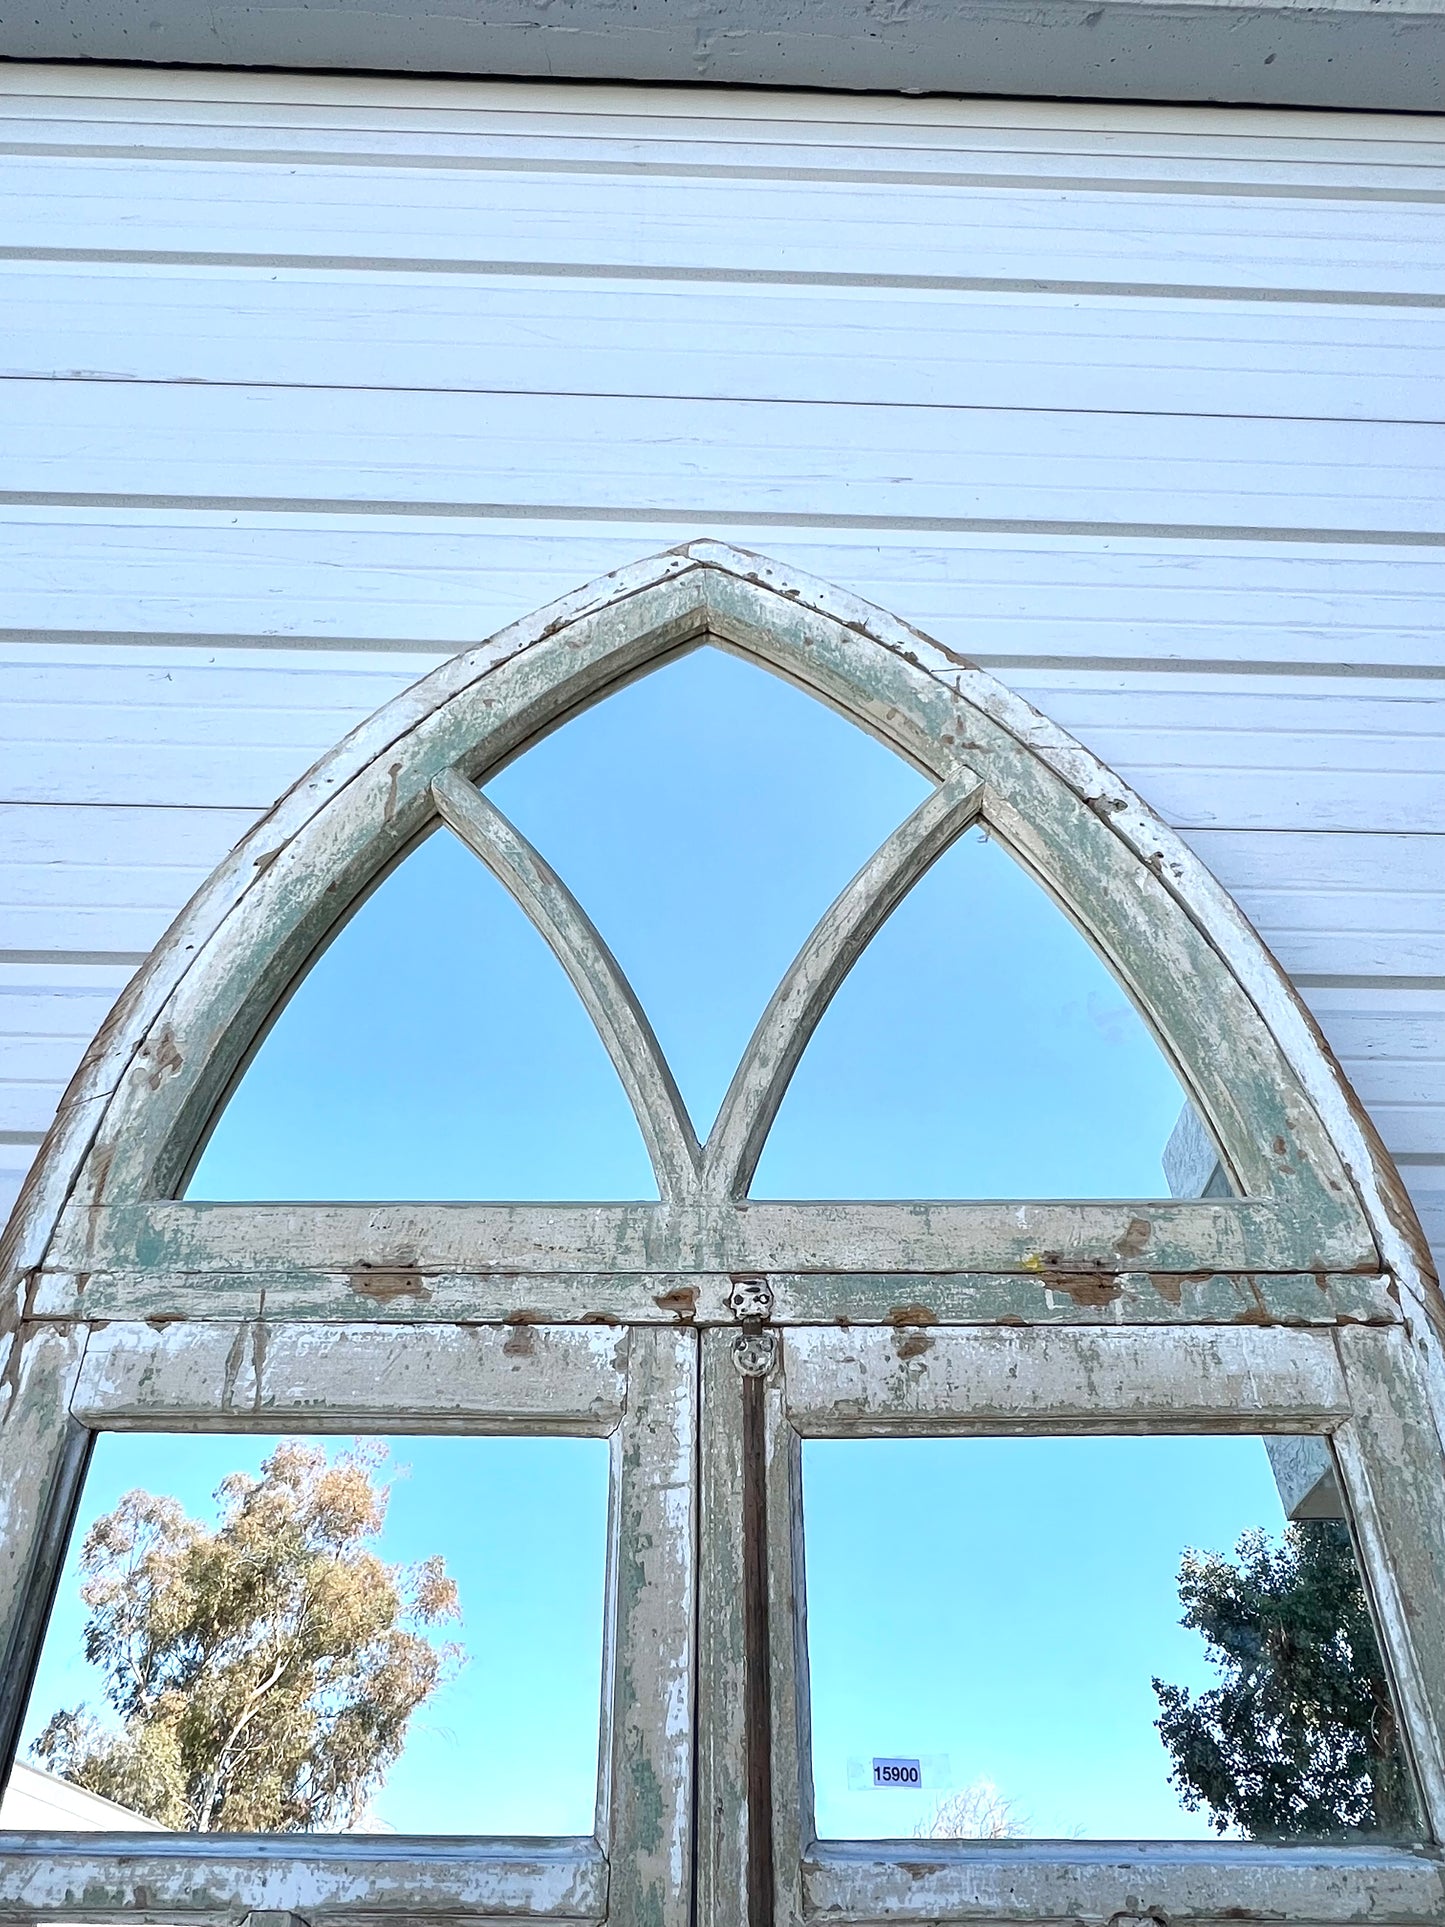 Painted Gothic Arched Window w/11 Glass Panes